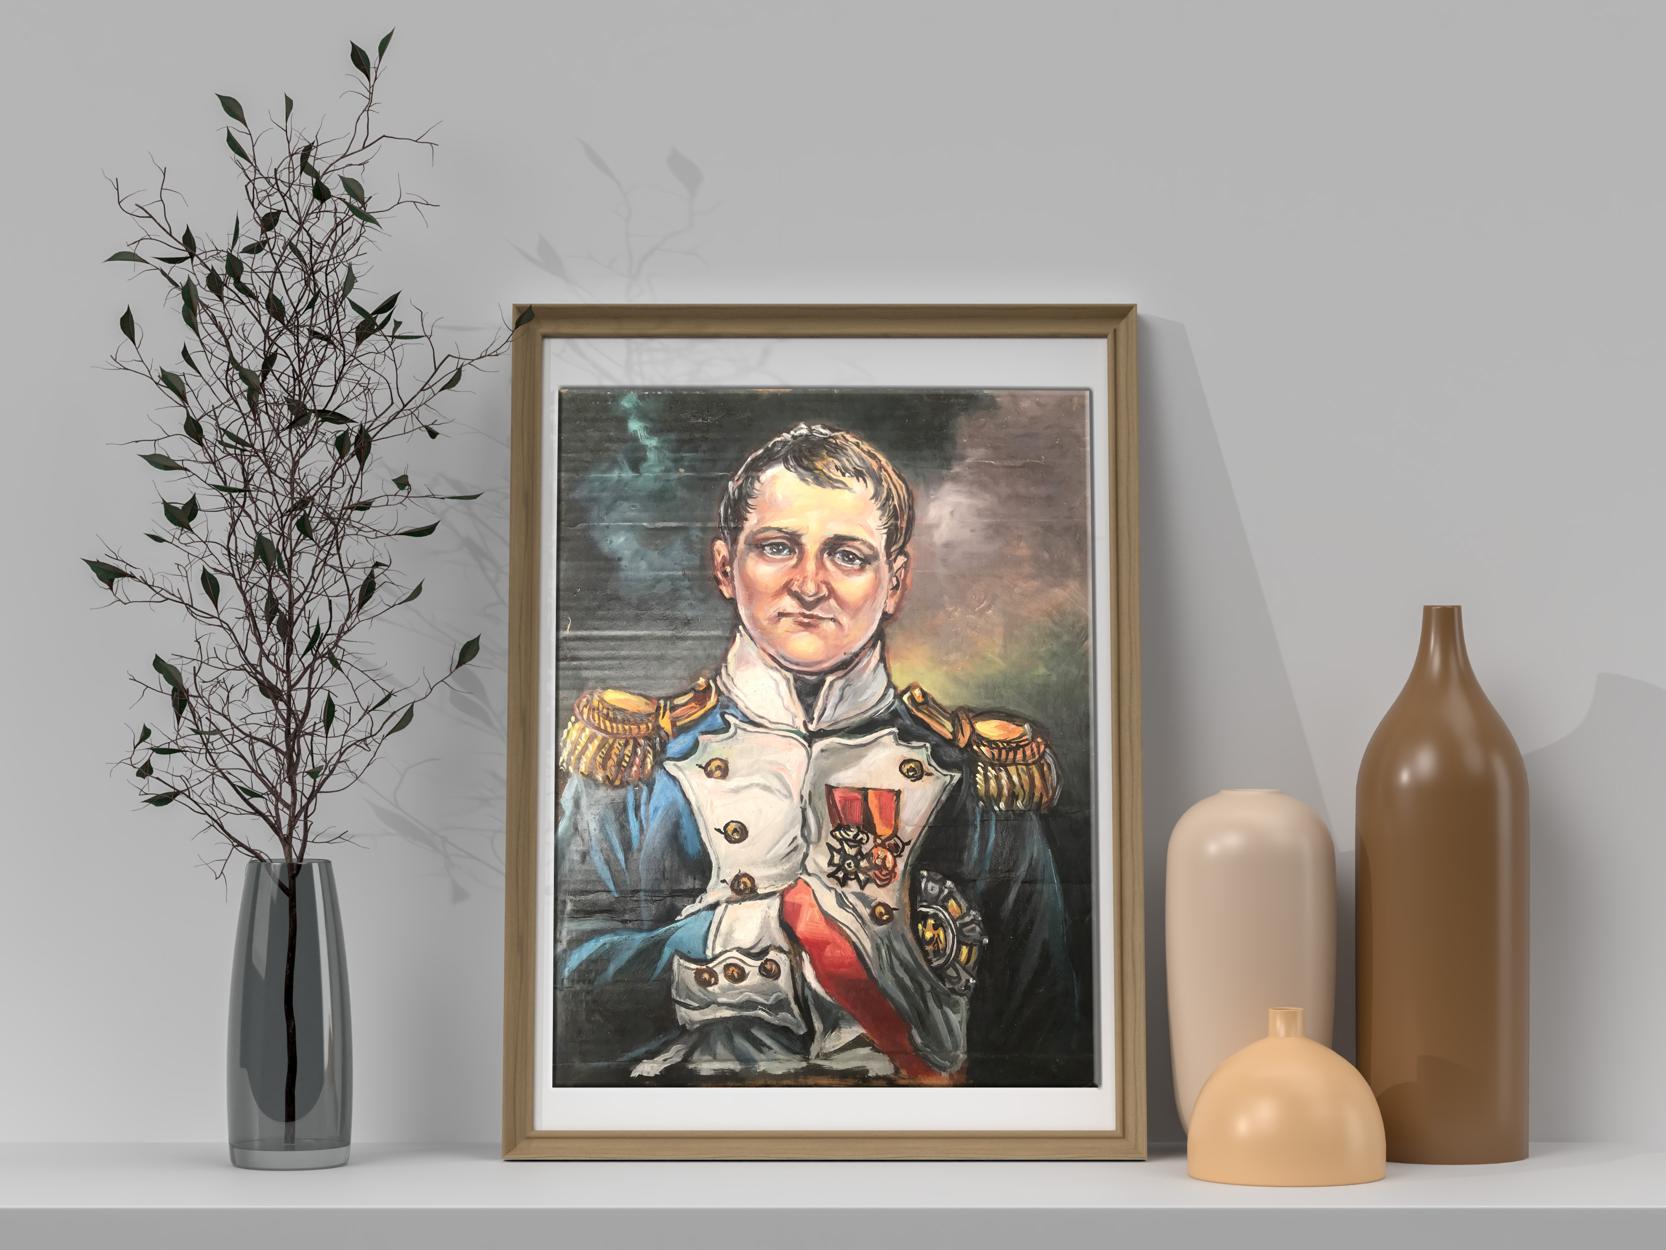 Alexander Litvinov presents an oil painting depicting a military portrait of Napoleon